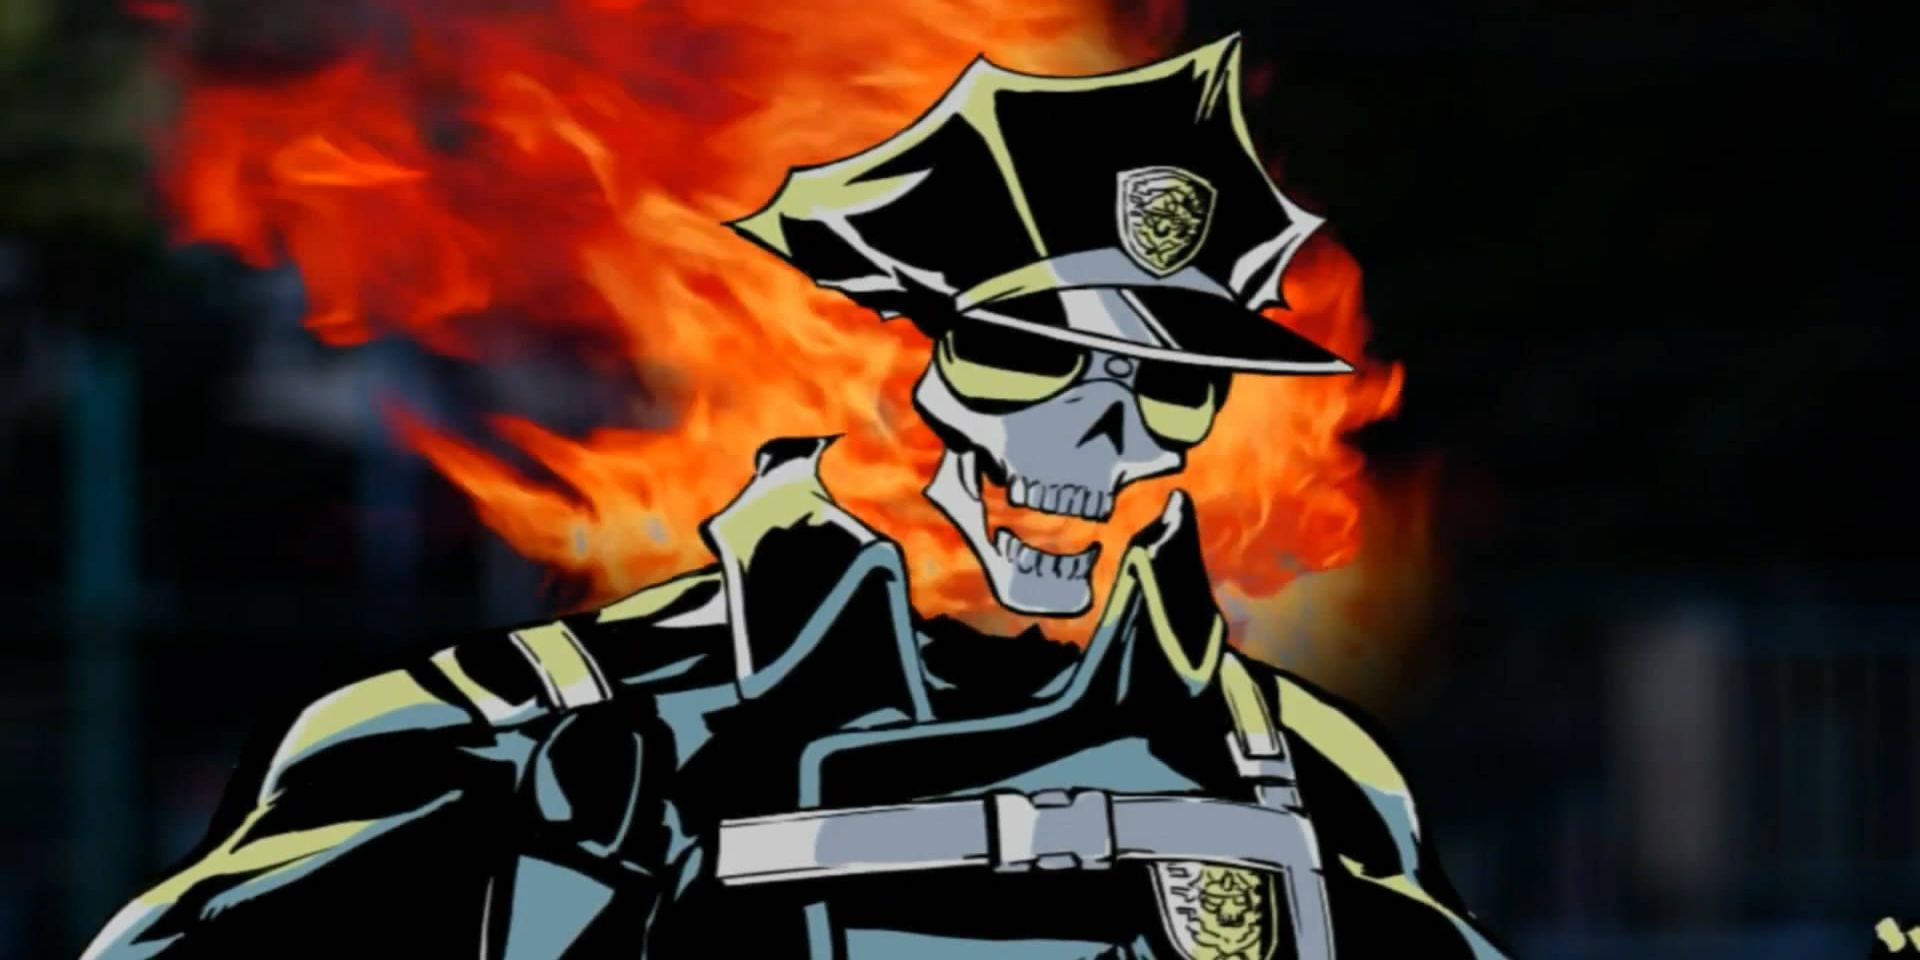 The titular character from the comedy anime series Inferno Cop.